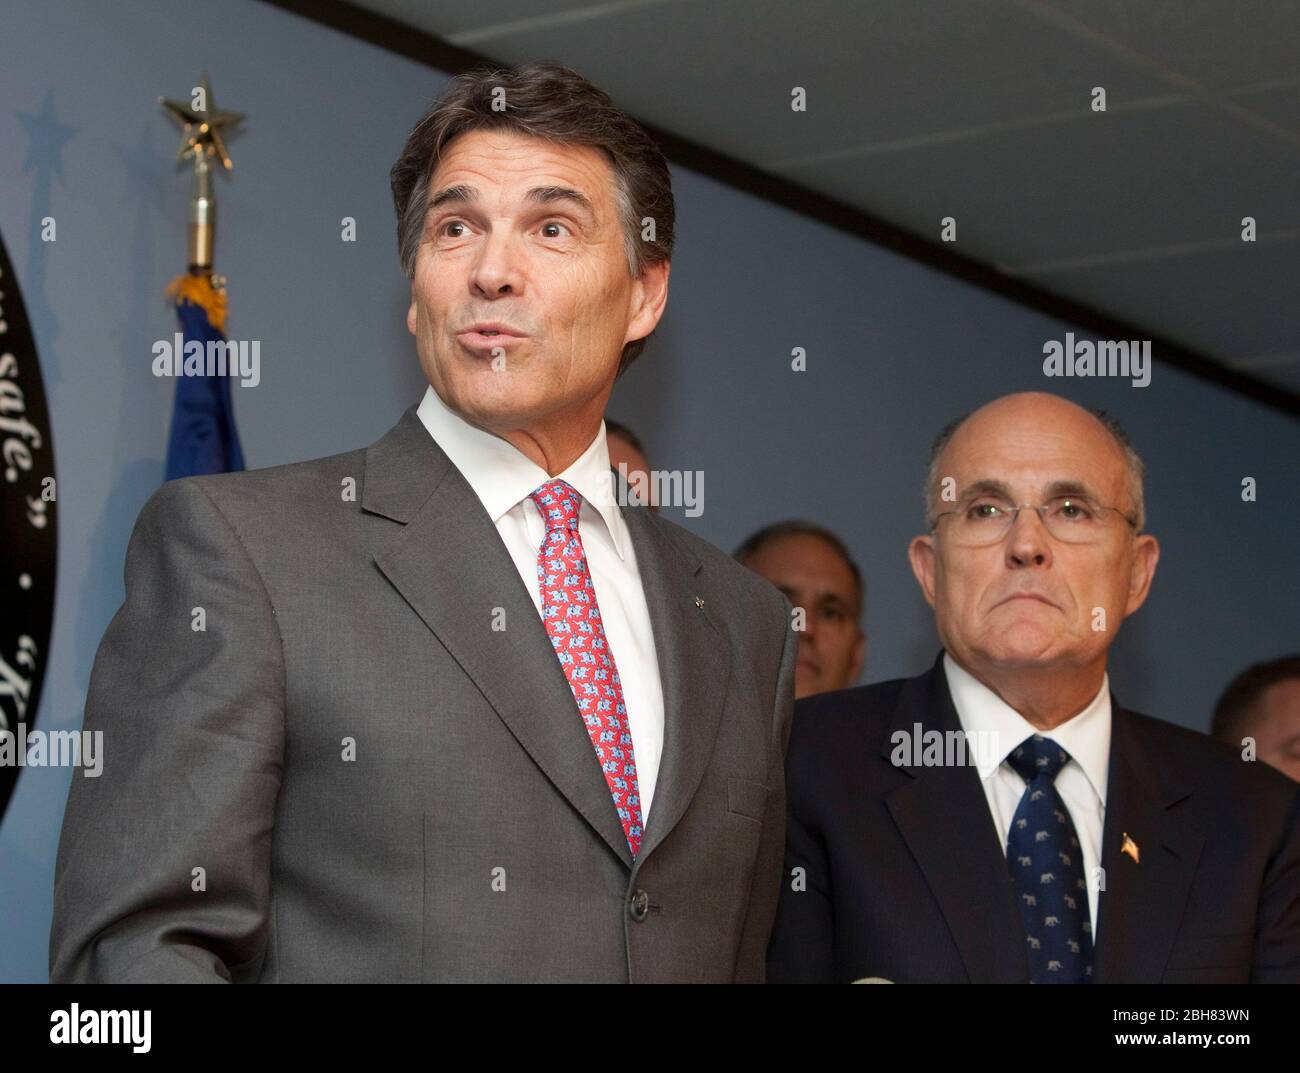 Austin Texas USA, September 15, 2009: Former New York City Mayor Rudy Giuliani (r) joins Texas Gov. Rick Perry at a press conference denouncing what they say is federal government inaction on border immigration issues that affect Texas as well as the rest of the United States. Perry and Giuliani are touring the state in a series of political fund-raisers. ©Bob Daemmrich Stock Photo